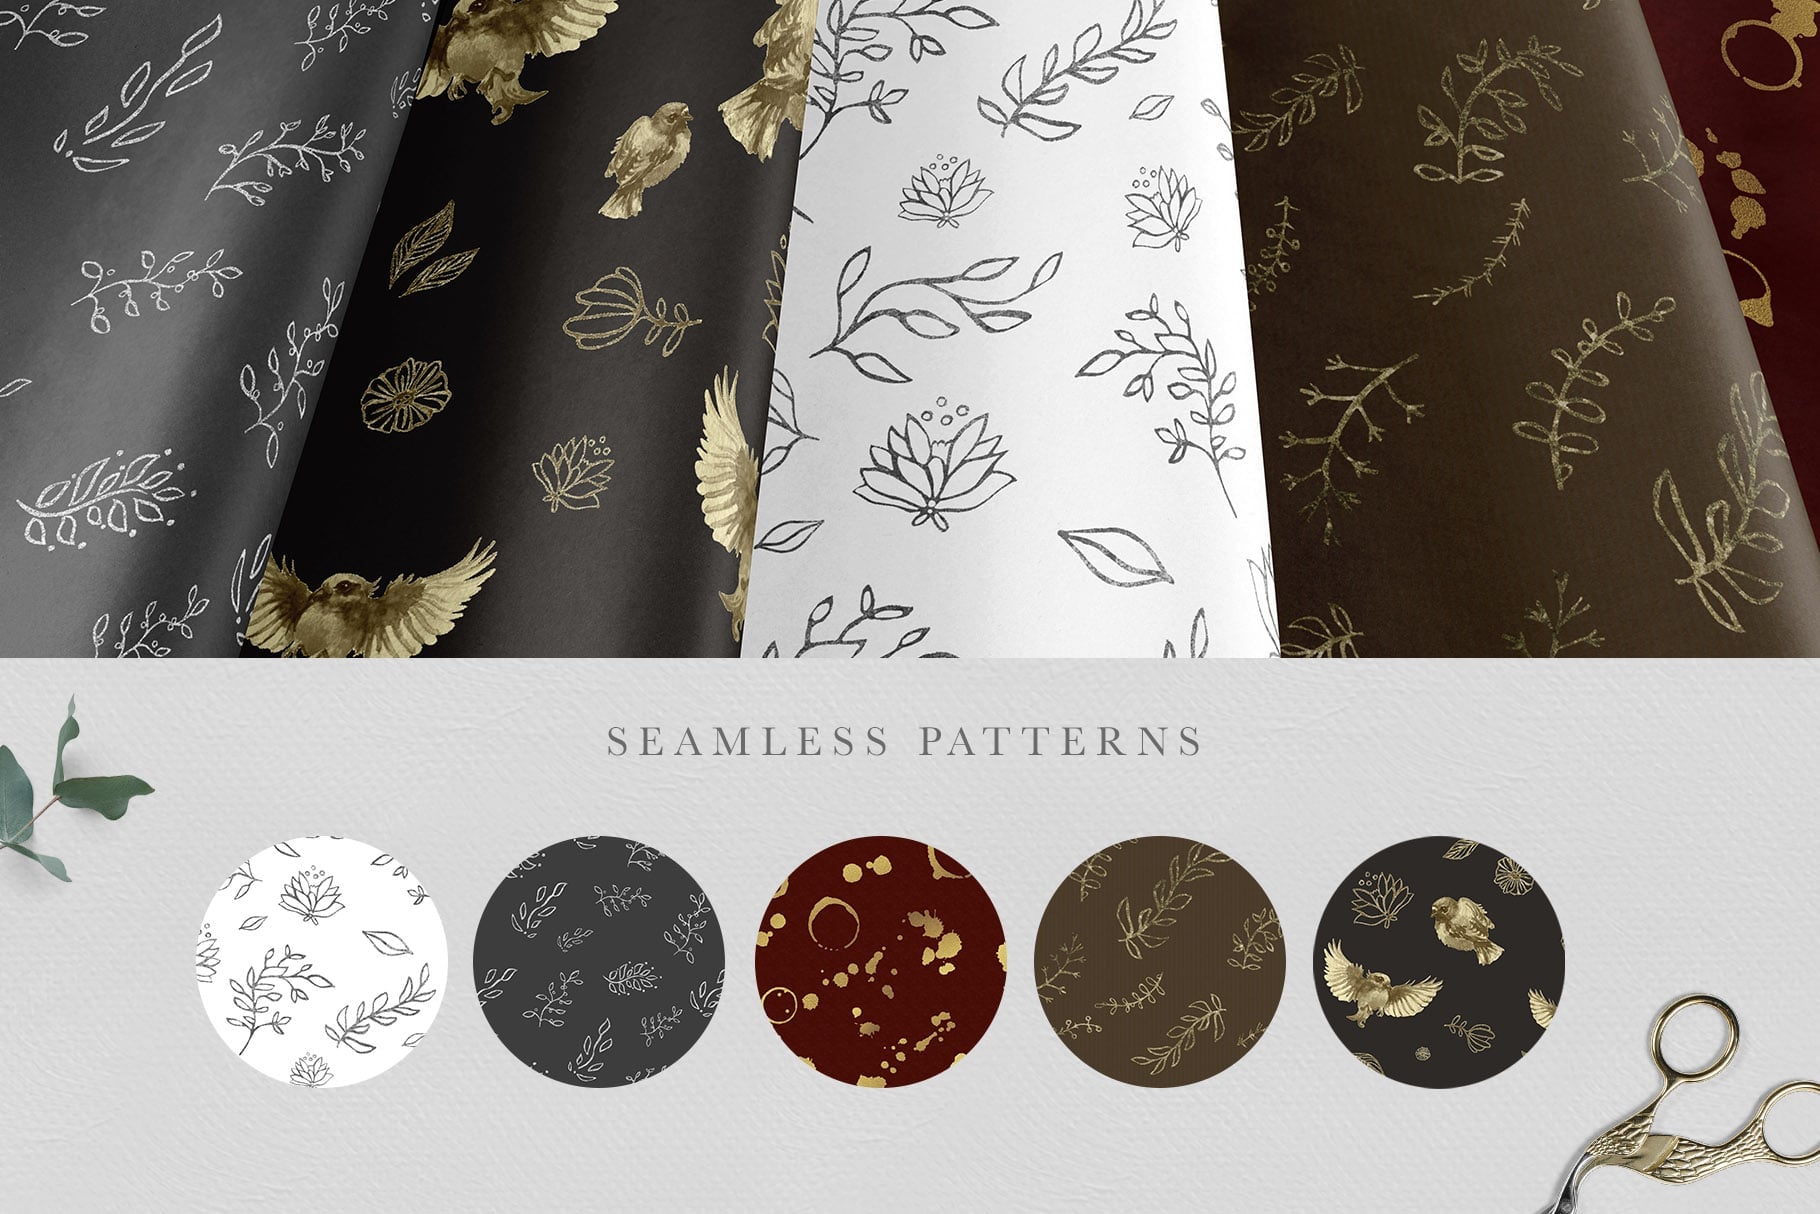 Premium elements with flowers, birds and leaves to decorate fabrics.